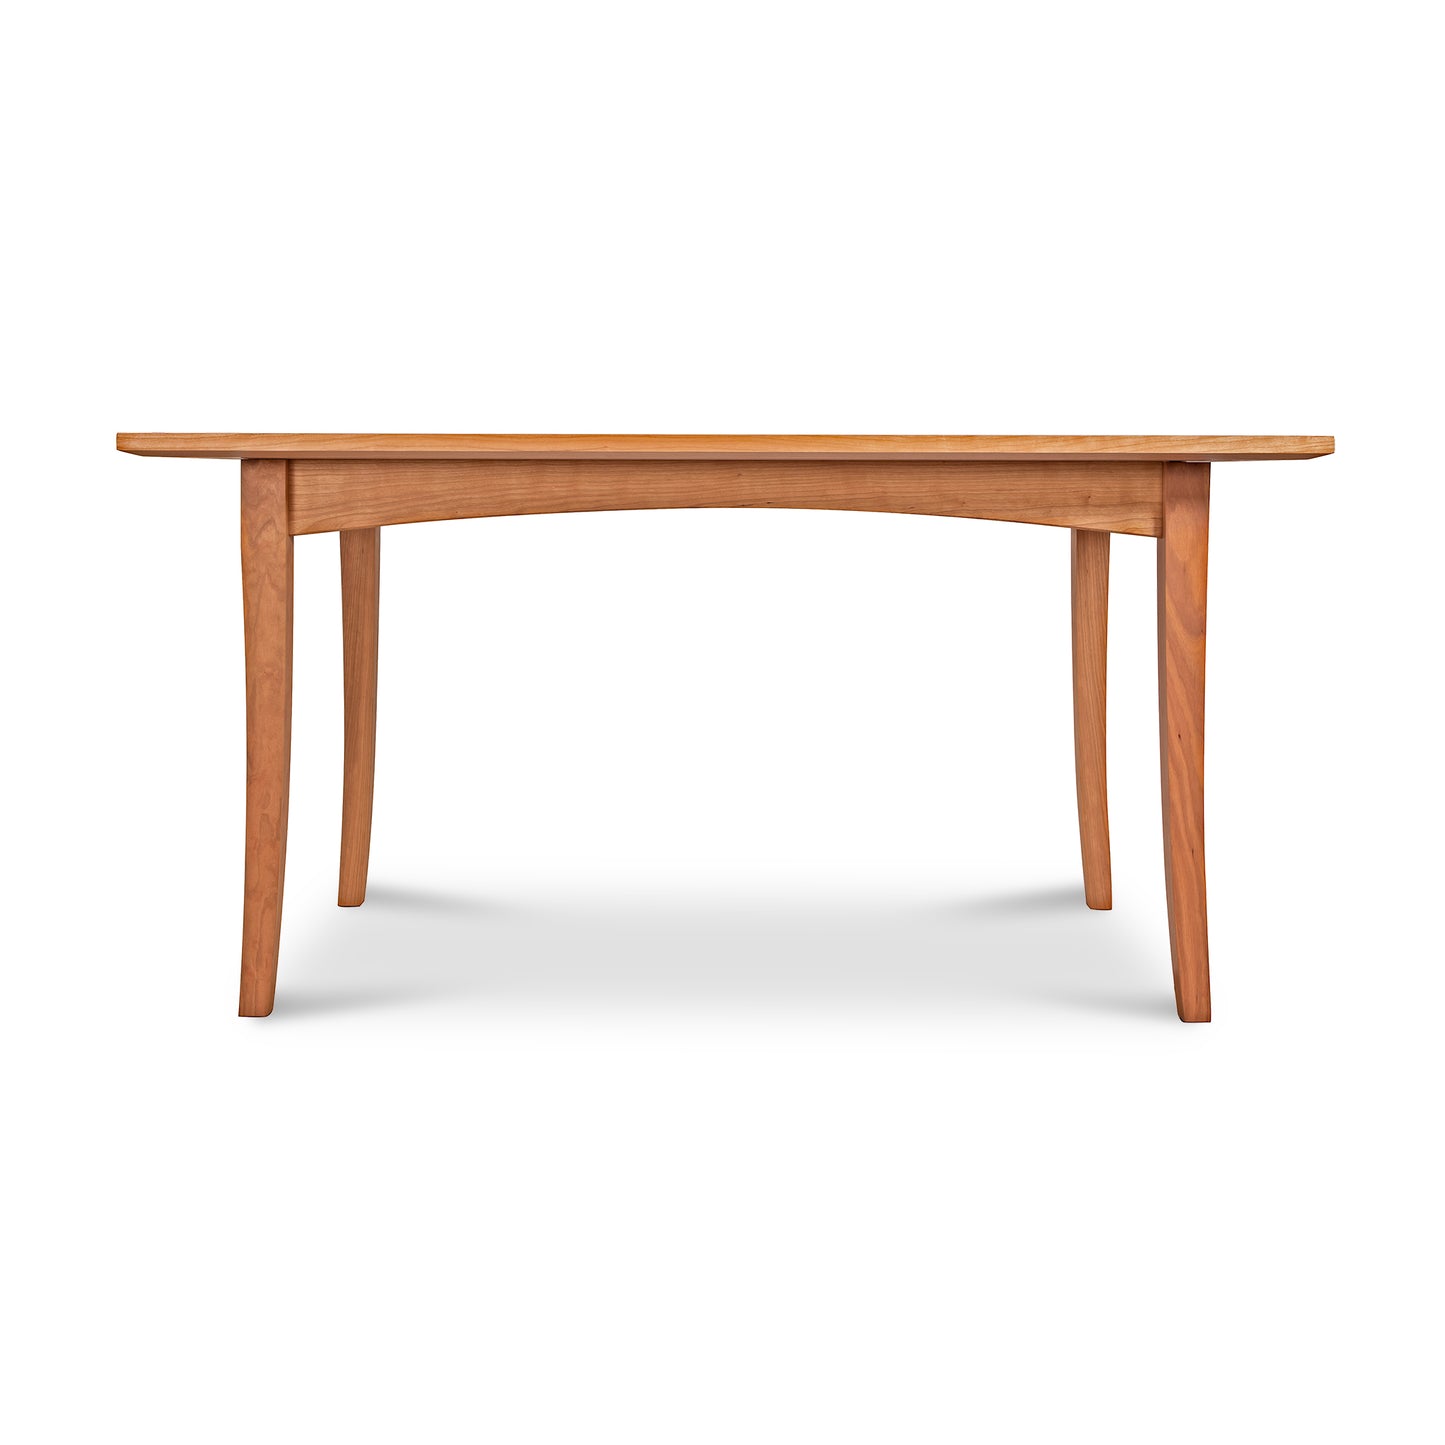 An Maple Corner Woodworks American Shaker Rectangular Solid Top Table with a smooth top and gently curved legs, isolated on a white background.